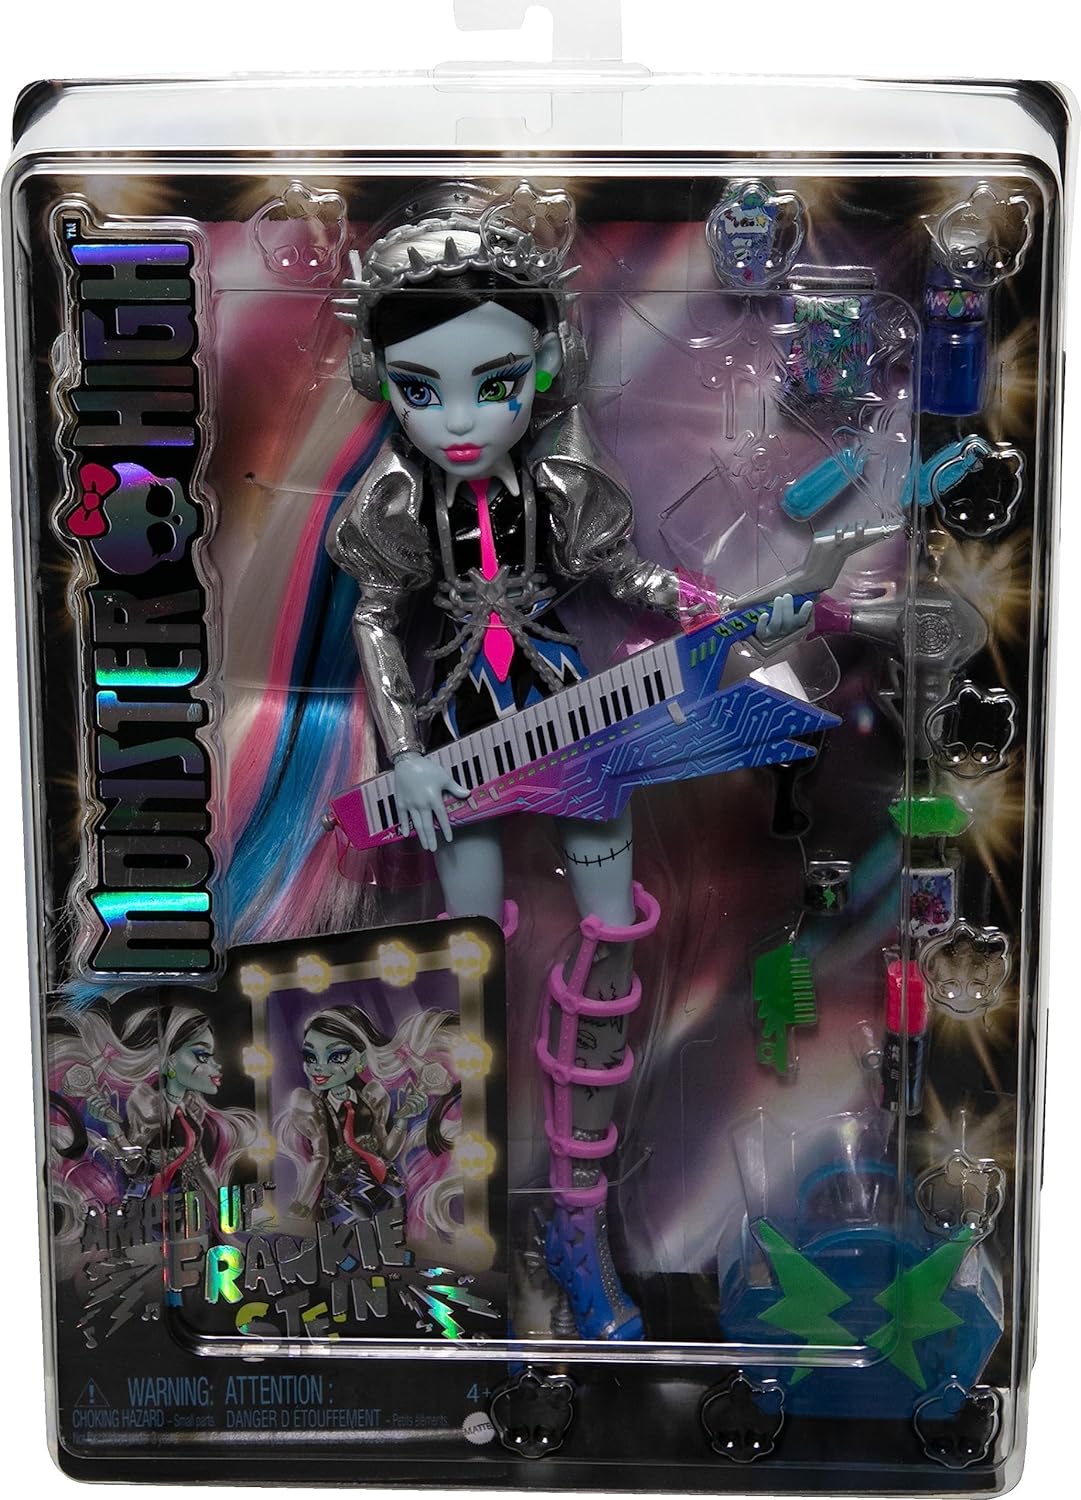 Monster High Doll, Amped Up Frankie Stein Rockstar with Instrument and Performance-Themed Accessories Like Headphones